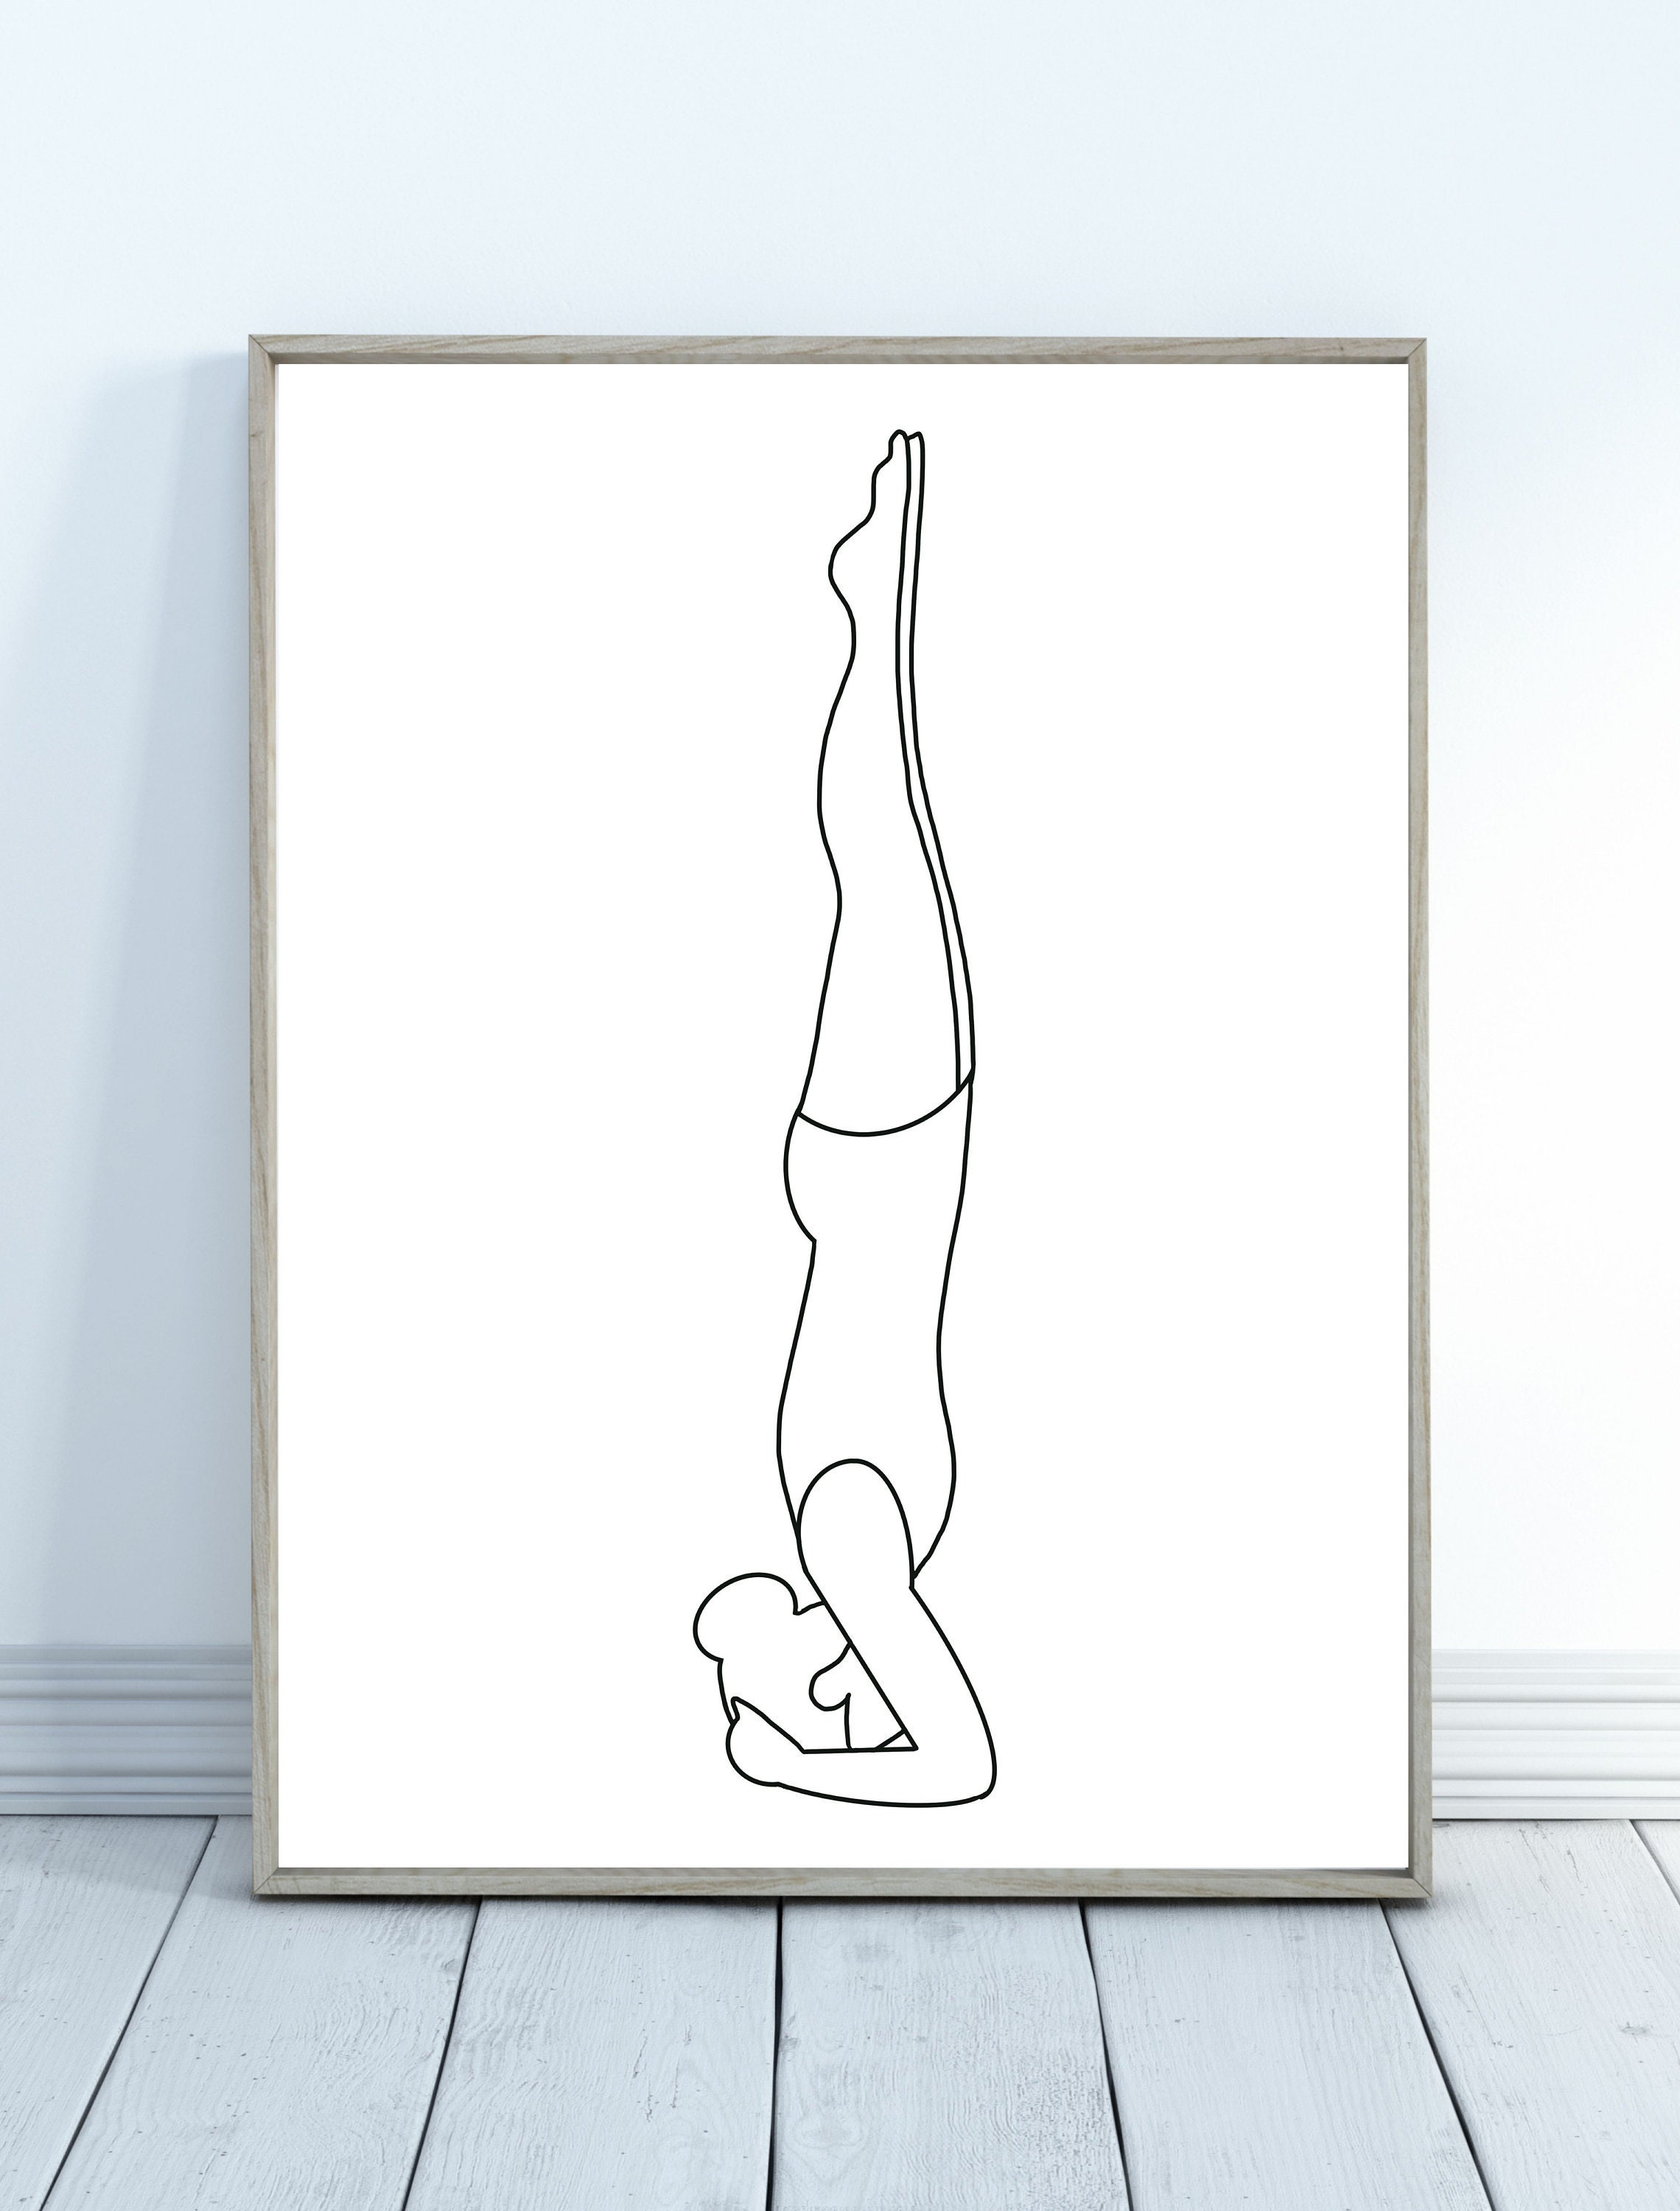 Yoga Stretching Workout Yoga Girl Improving Her Flexibility Pose Sketch  Vector Illustration Stock Illustration - Download Image Now - iStock